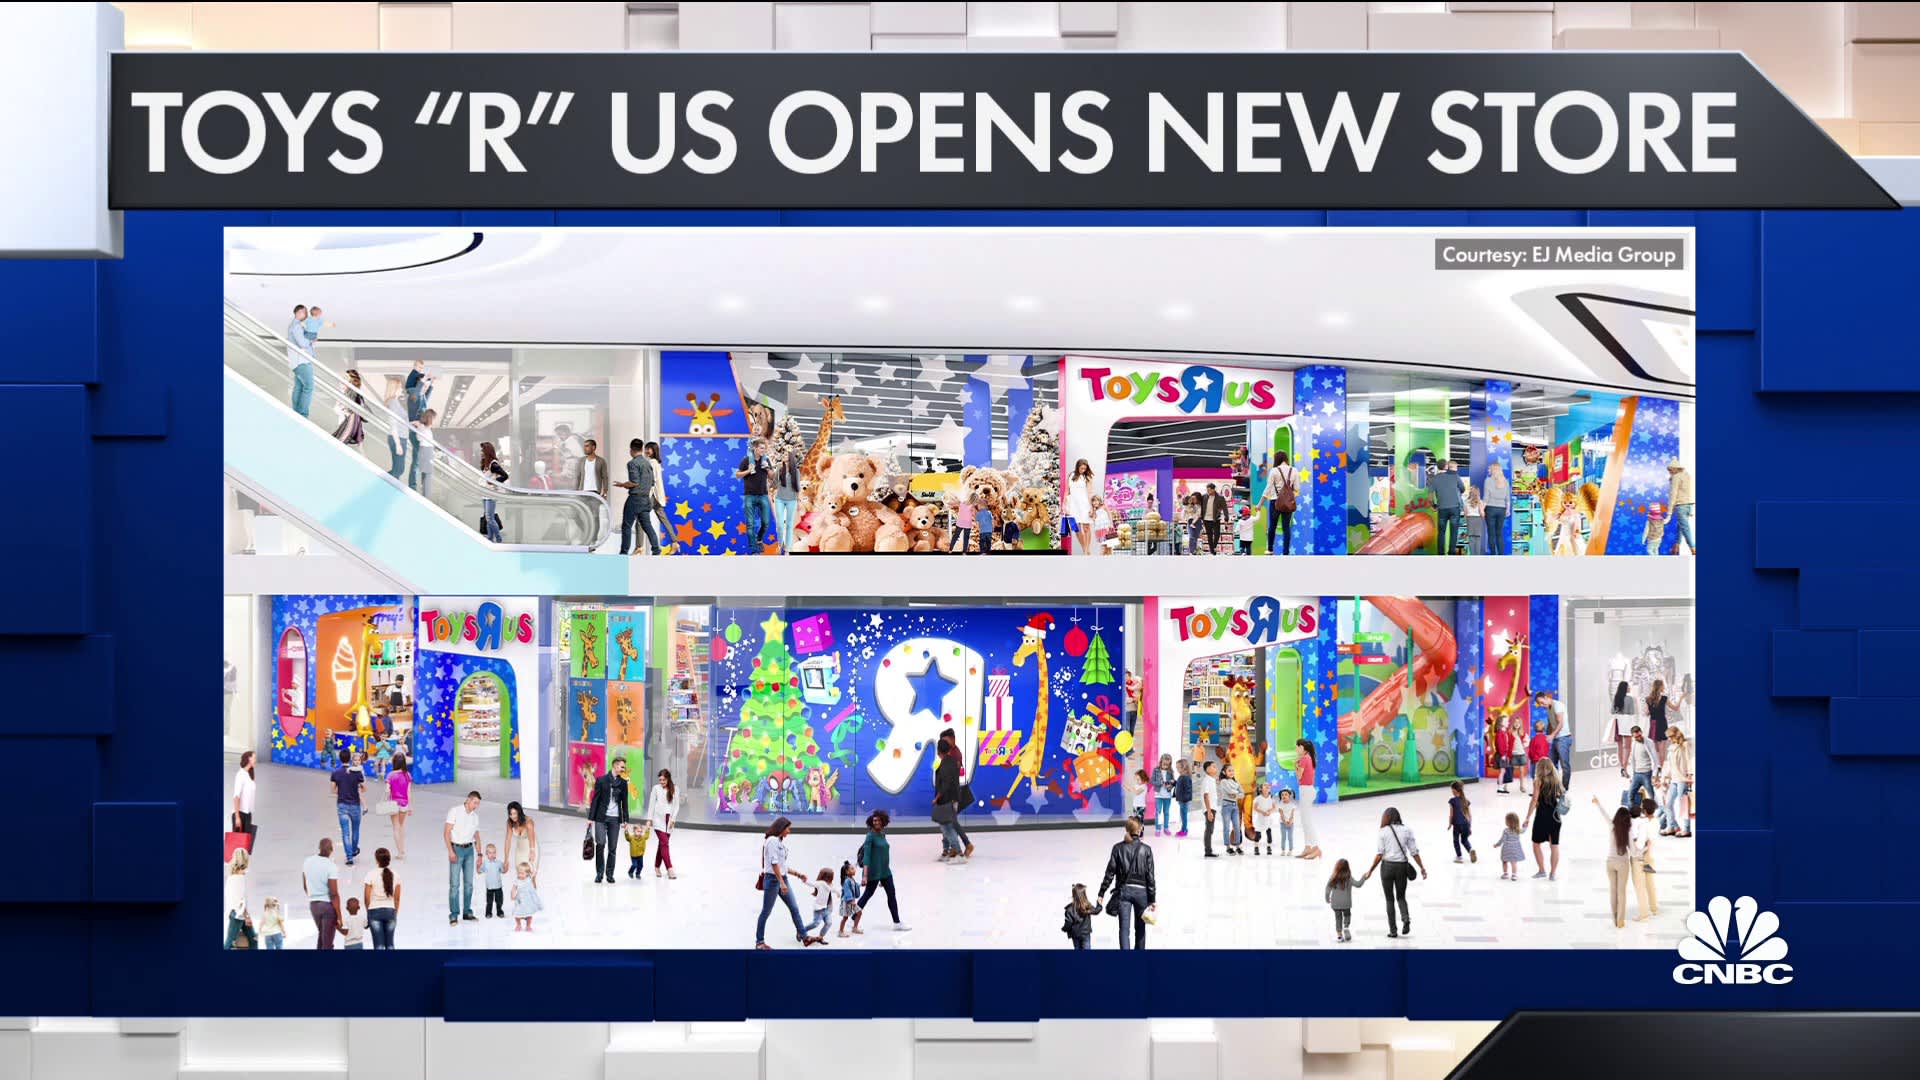 American Dream sours for owners of US mega-mall amid 'significant' cash  crisis, Retail industry